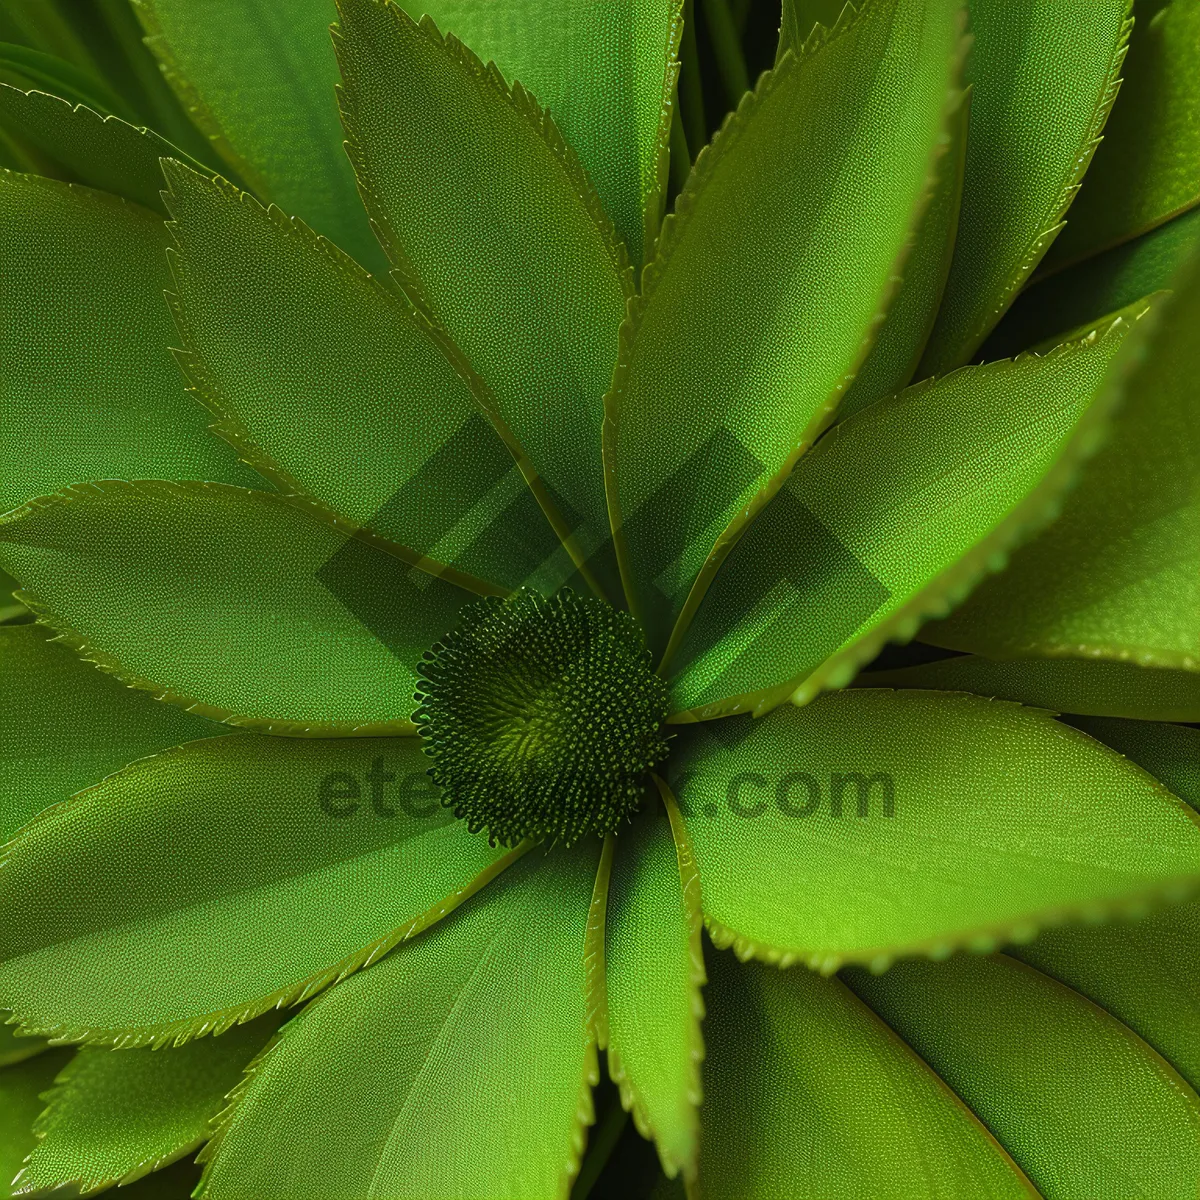 Picture of Botanical Foliage: Close-Up View of Woody Plant